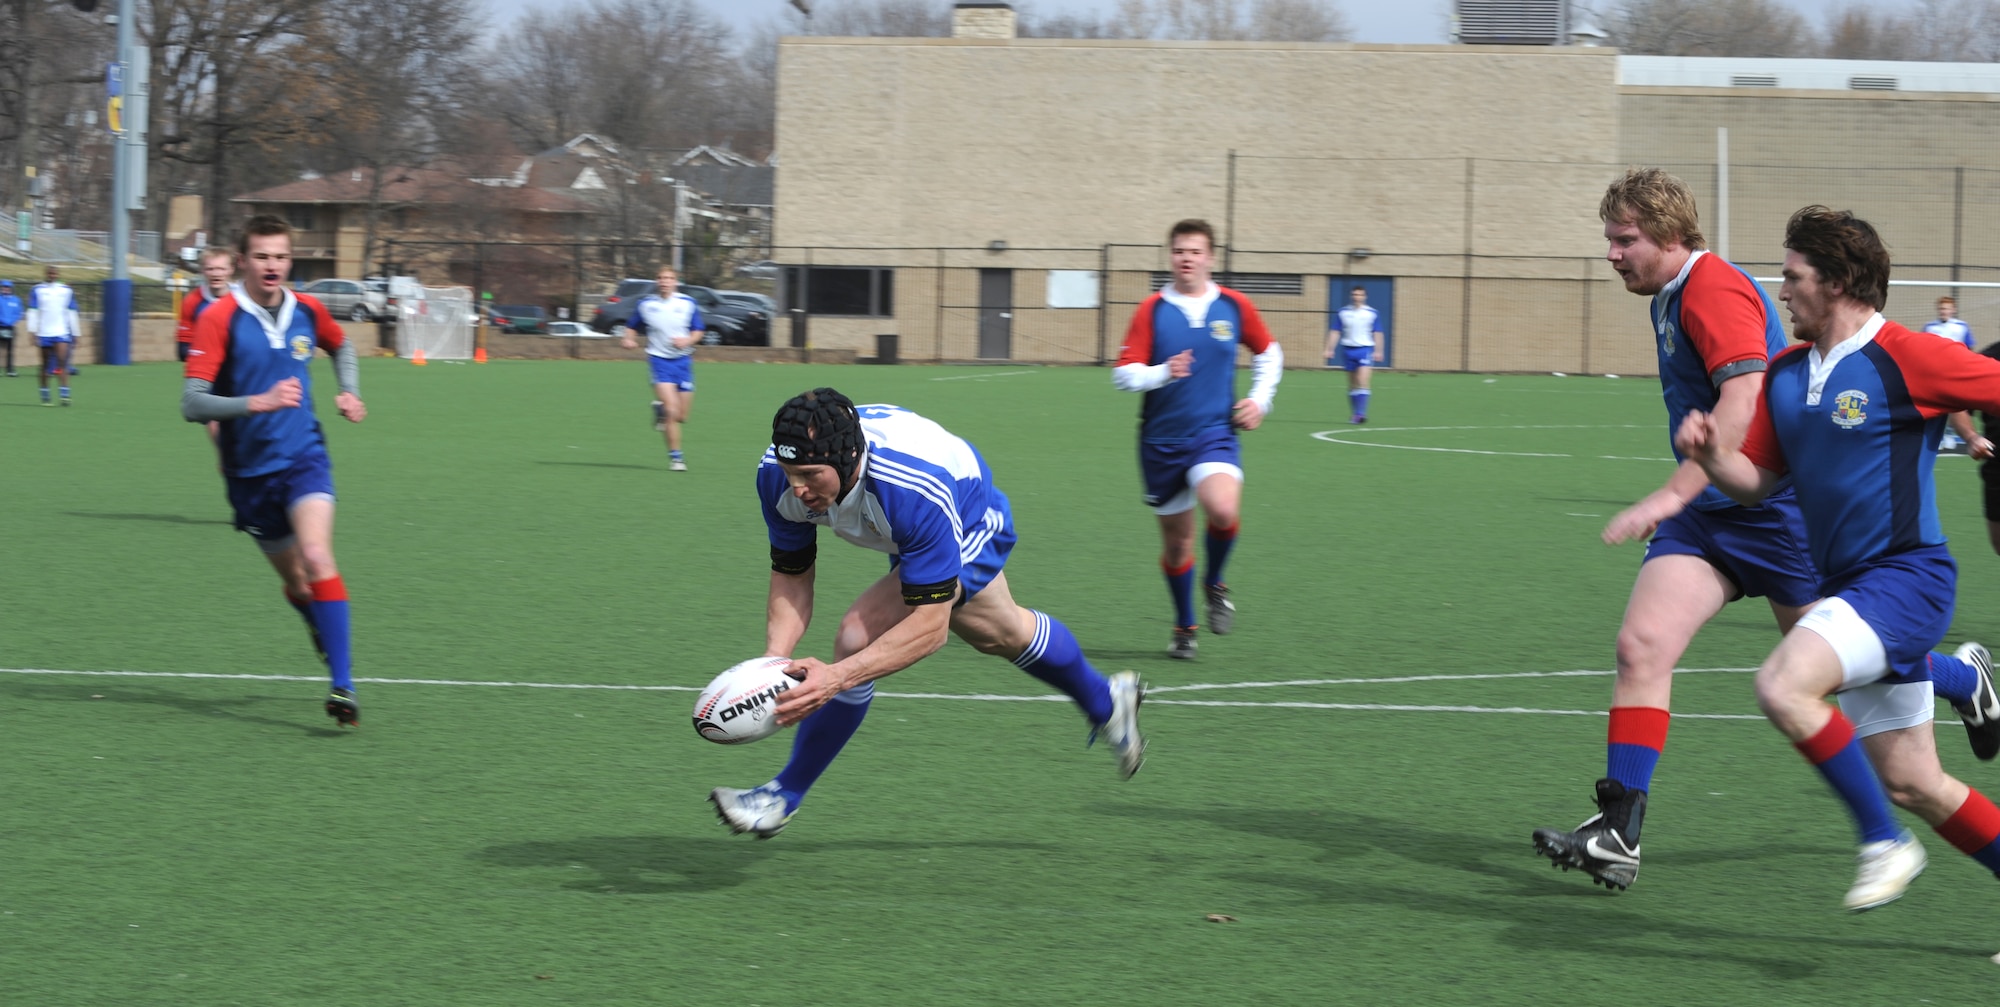 Nate Conkey, Kansas City Blues Rugby Club, successfully grabs the ball during practice in Kansas City, Mo., March 16, 2013. A U.S. Army major, Conkey is one of a handful of Service members who makes the trip to Kansas City three times a week to practice and play with the Blues. (U.S. Air Force photo by Senior Airman Brigitte N. Brantley/Released)